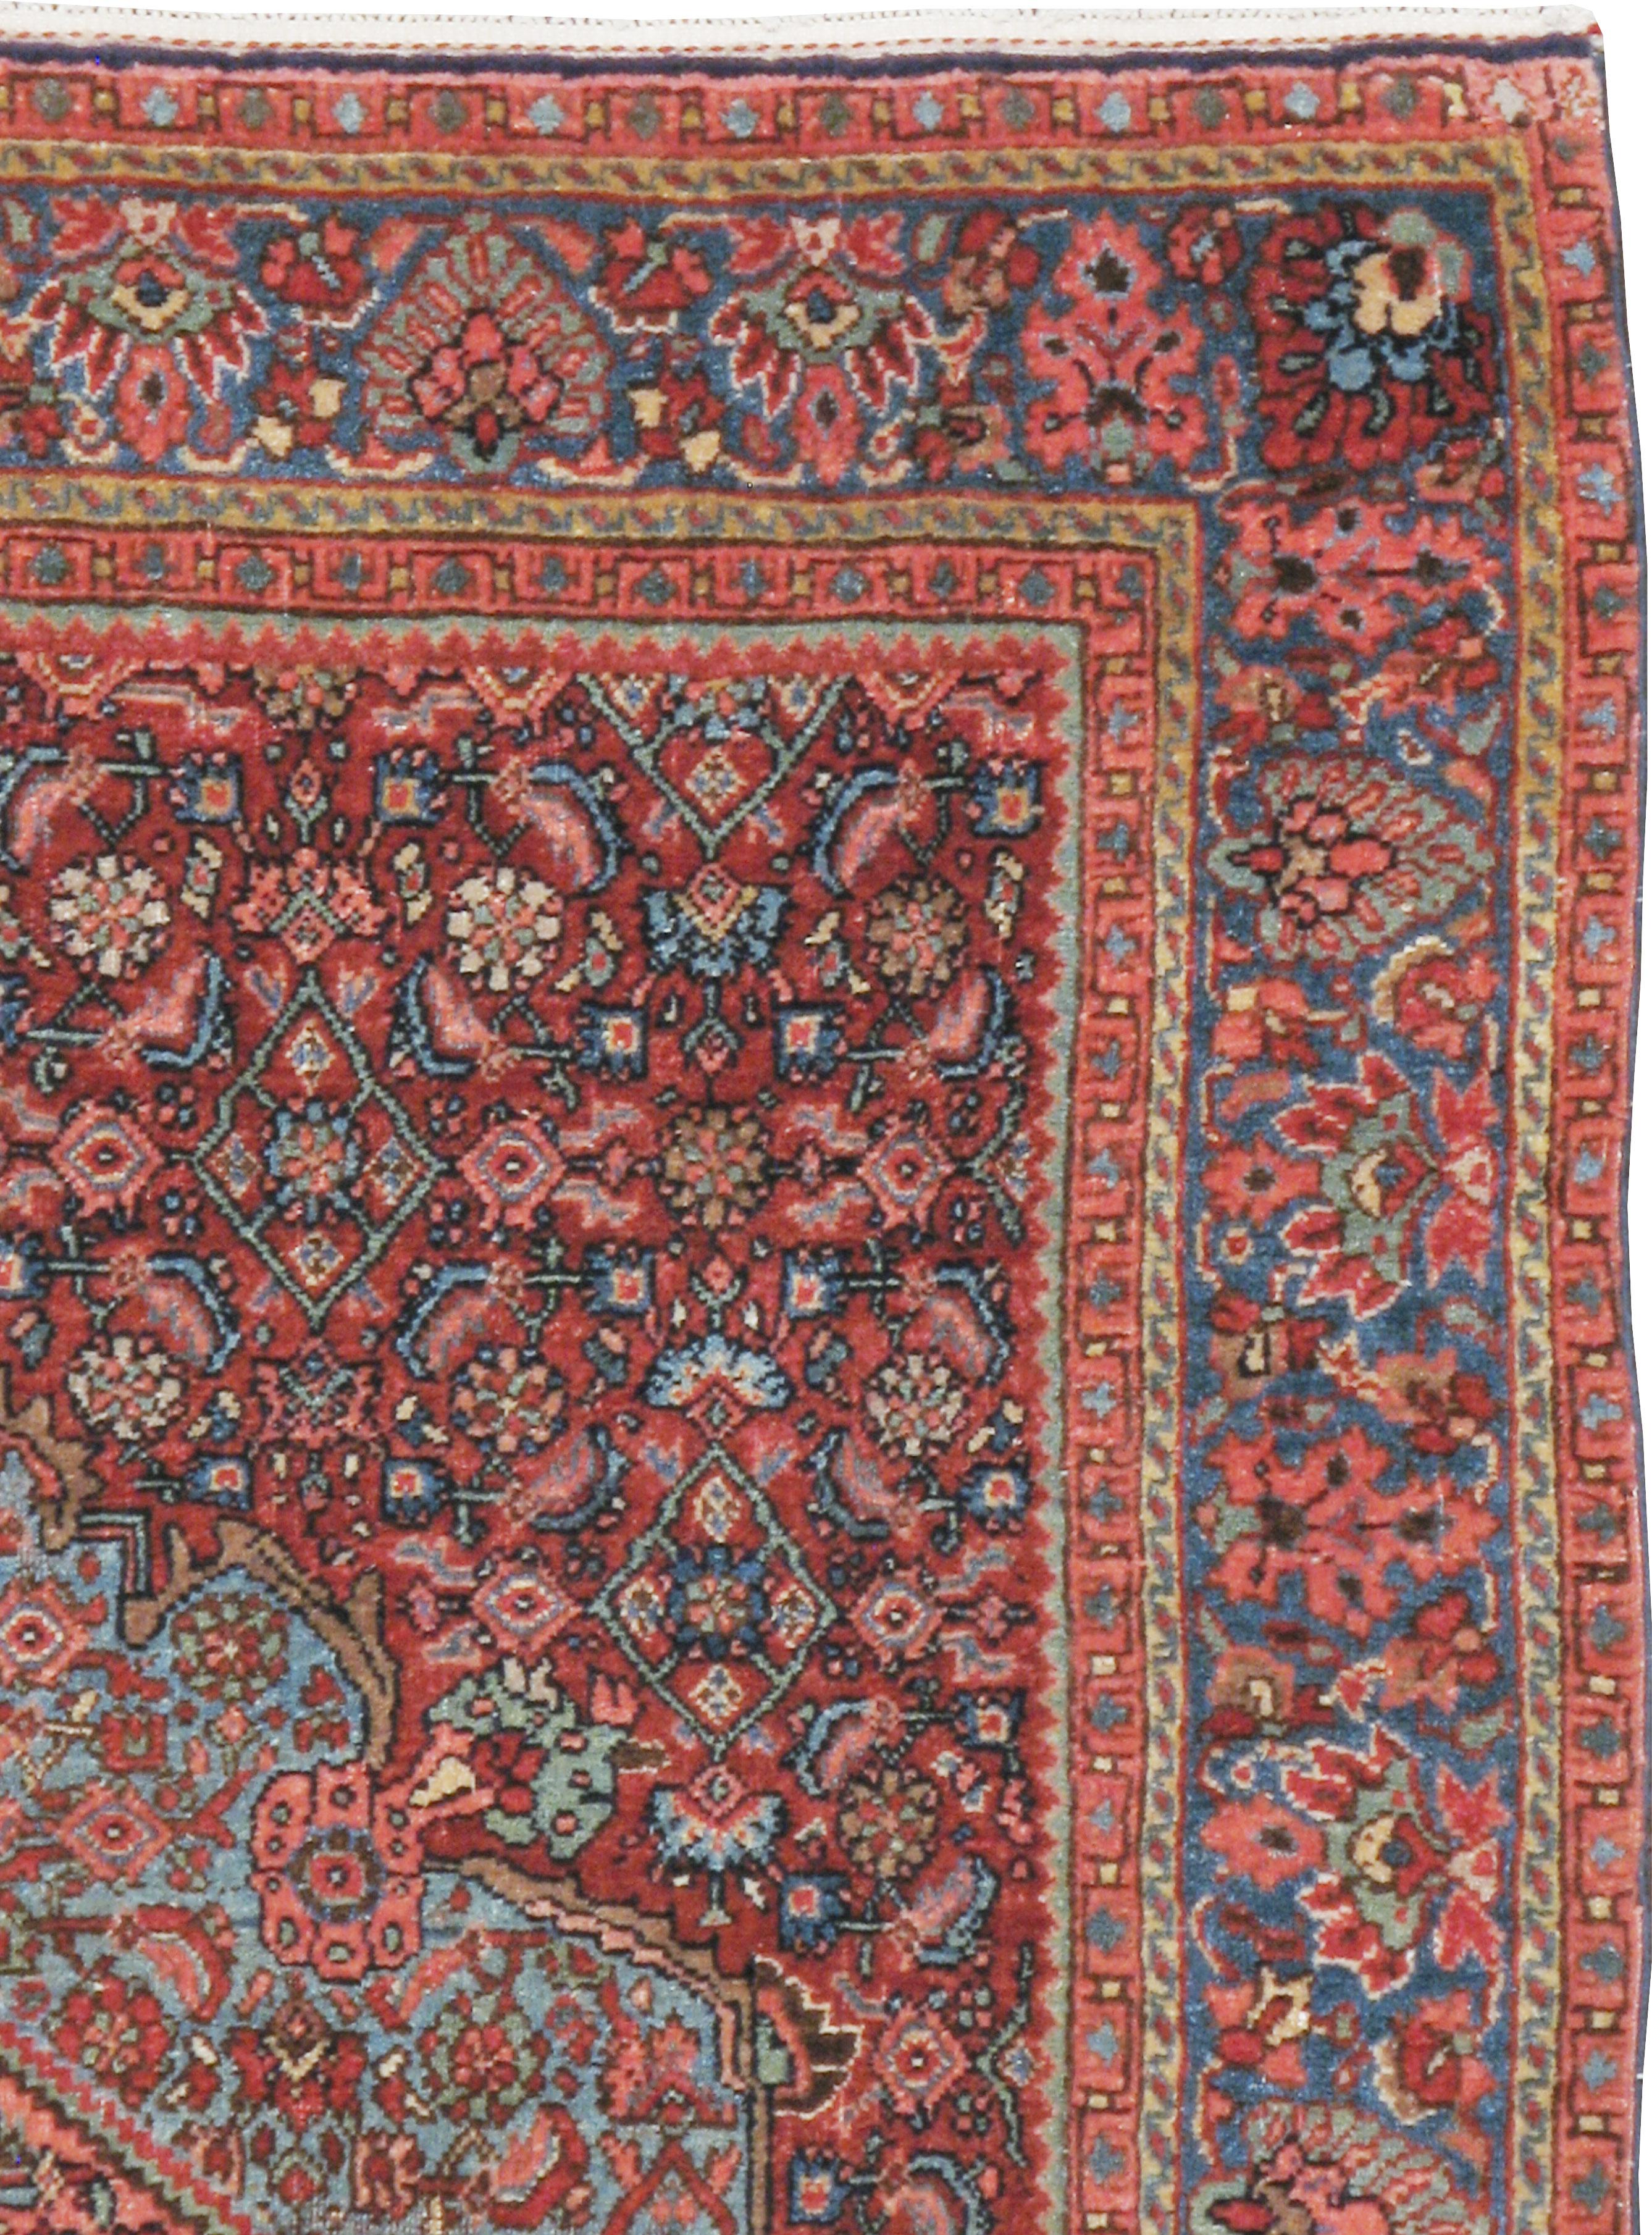 An antique Persian Bidjar rug from the early 20th century. The wine red small Herati pattern field is overlaid by a light blue involute Herati medallion which, in turn, is centered by a hexagonal peach sub-medallion. The medium blue border has